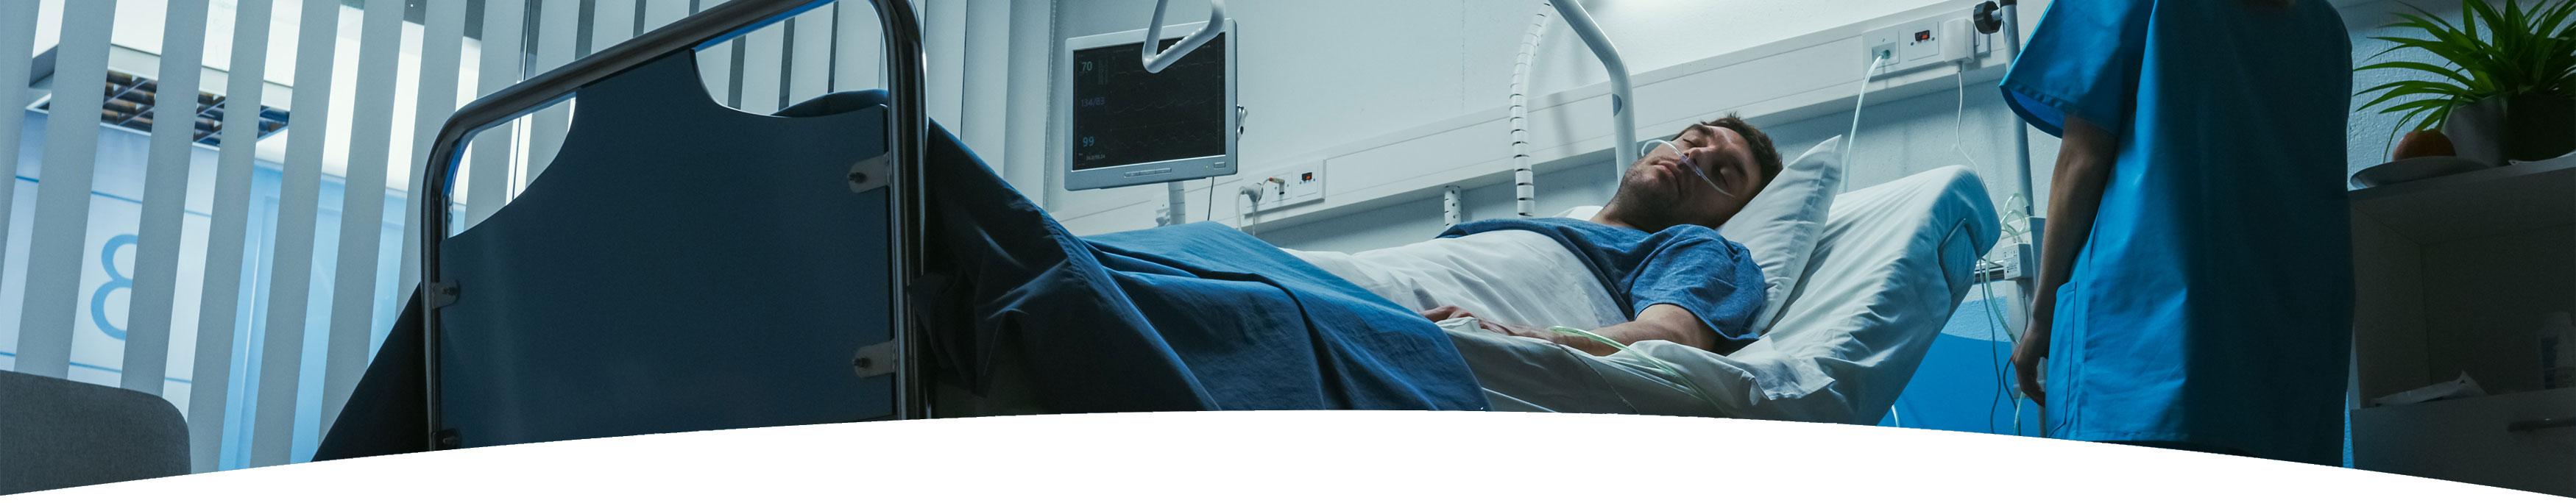 Banner picture of a male patient sleeping in a swing bed with a nasal cannula in his nose. There is a female Nurse standing next to his side, checking on him.